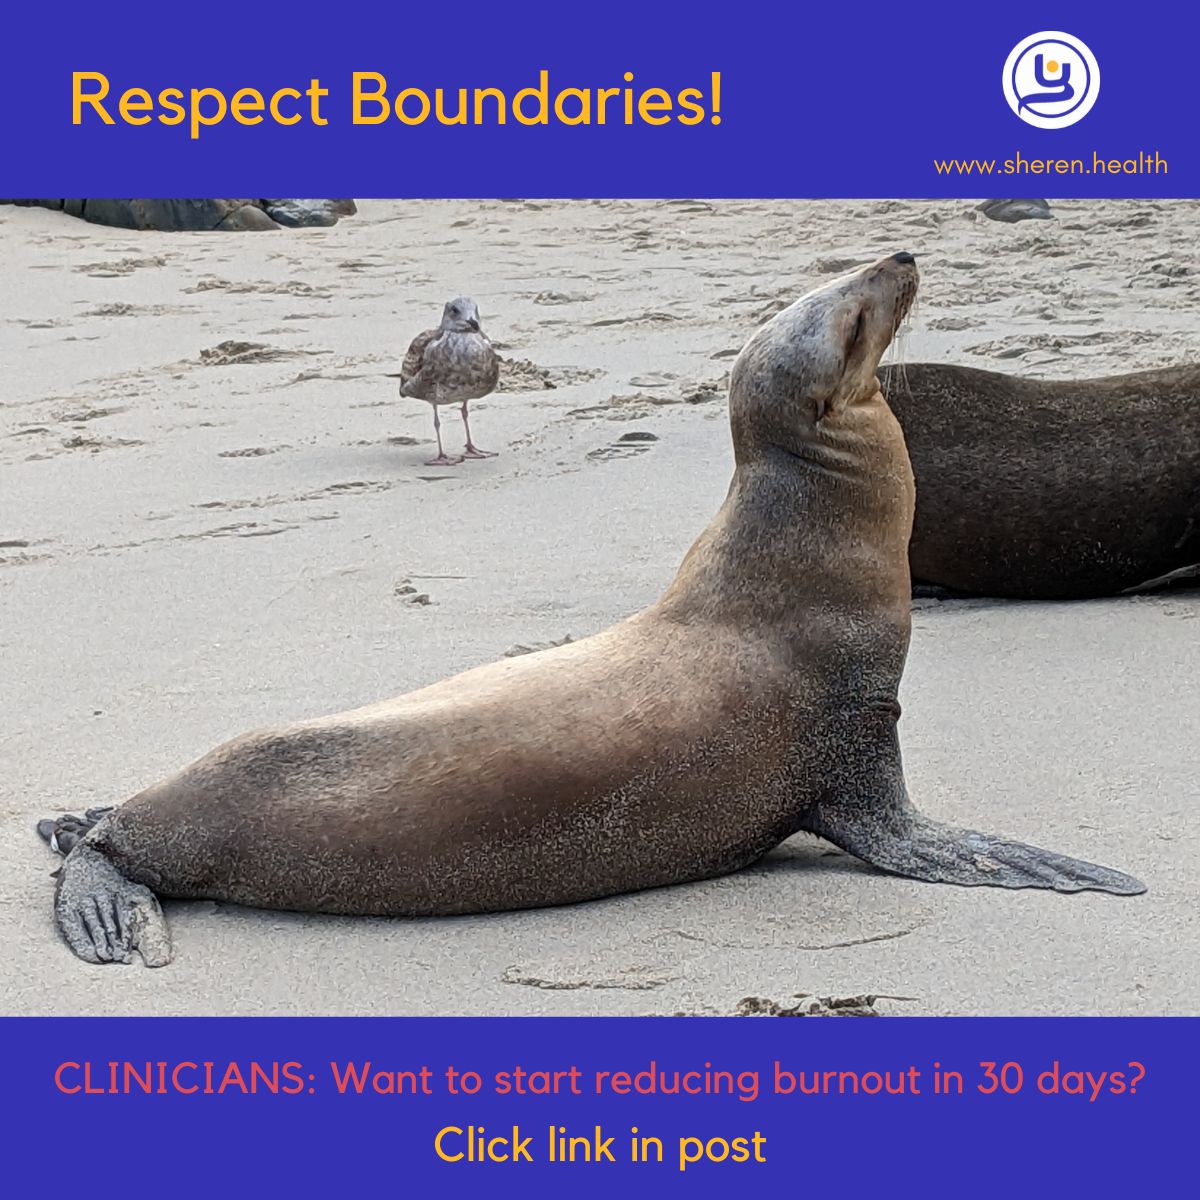 Respect boundaries in clinical care & #PreventBurnout. Join #EmbodiedClinician program to increase your wellbeing! Chat w me to see how it can benefit you bit.ly/EmbodiedChat

Pic shows seals at La Jolla SD where visitors told to keep out of their space. Not everyone listens!